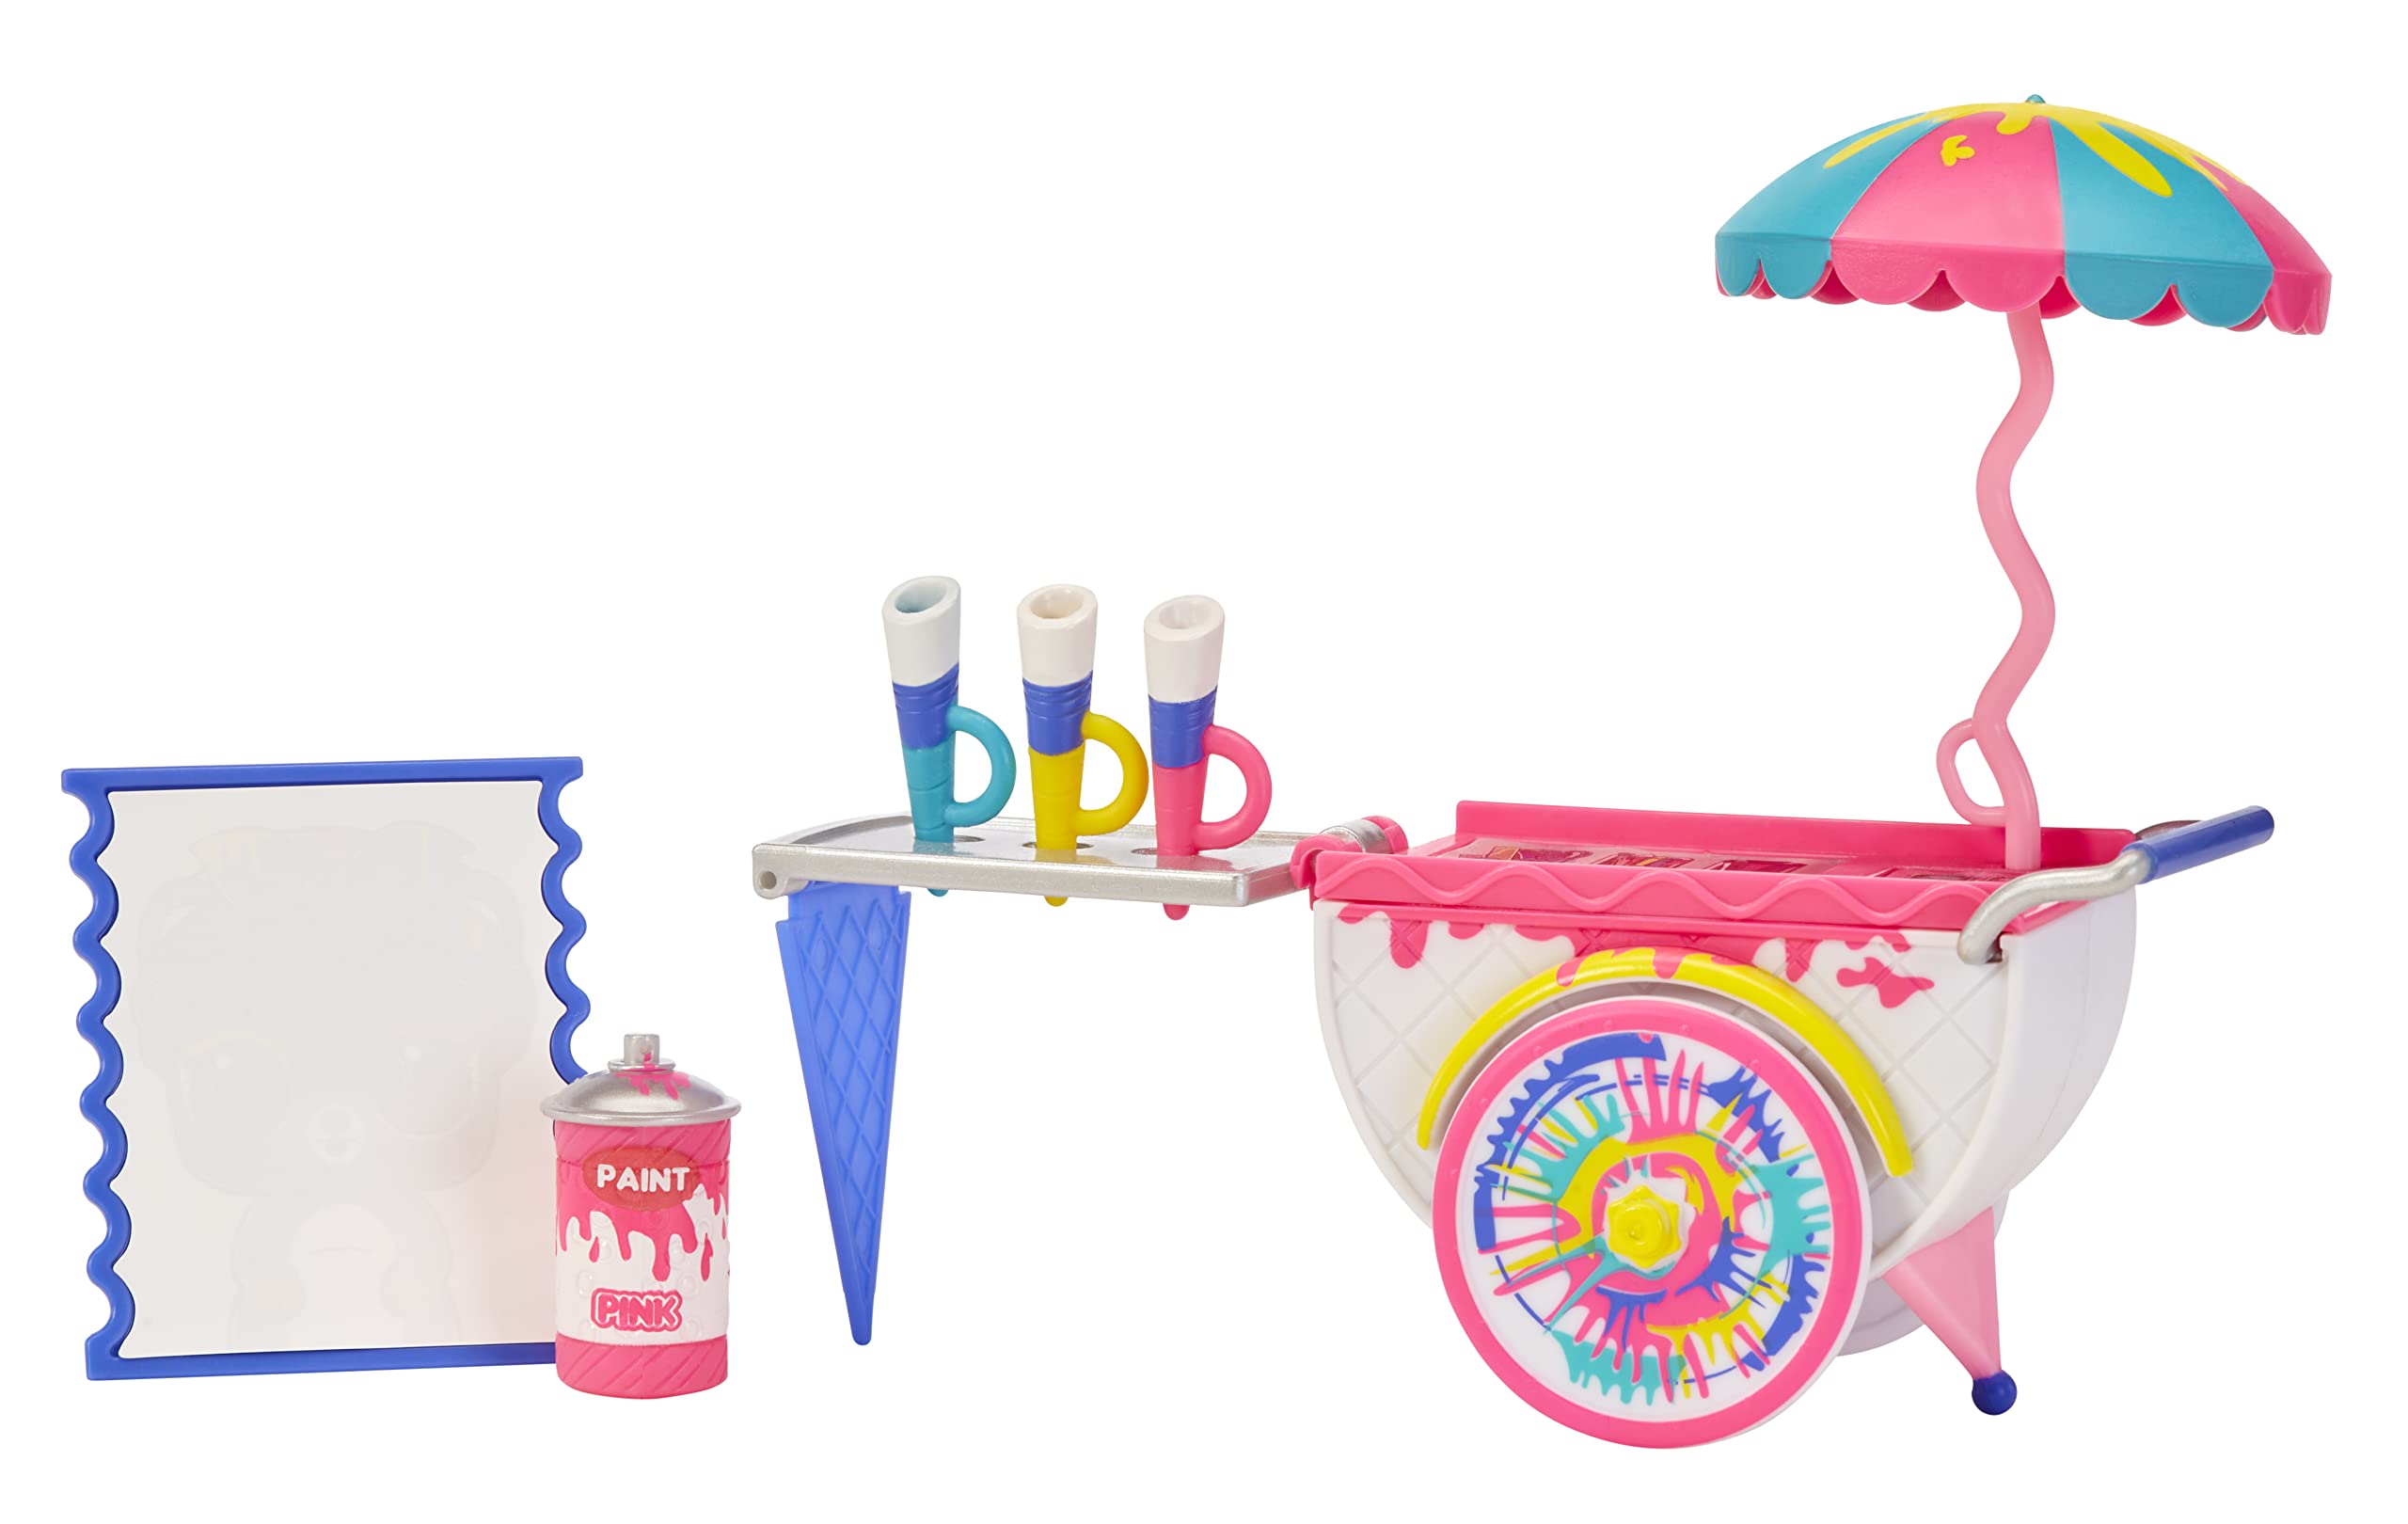 L.O.L. Surprise! OMG House of Surprises Art Cart Playset w/ Splatters Collectible Doll, 8 Surprises & Dollhouse Accessories $6.99 + Free Shipping w/ Prime or on $25+